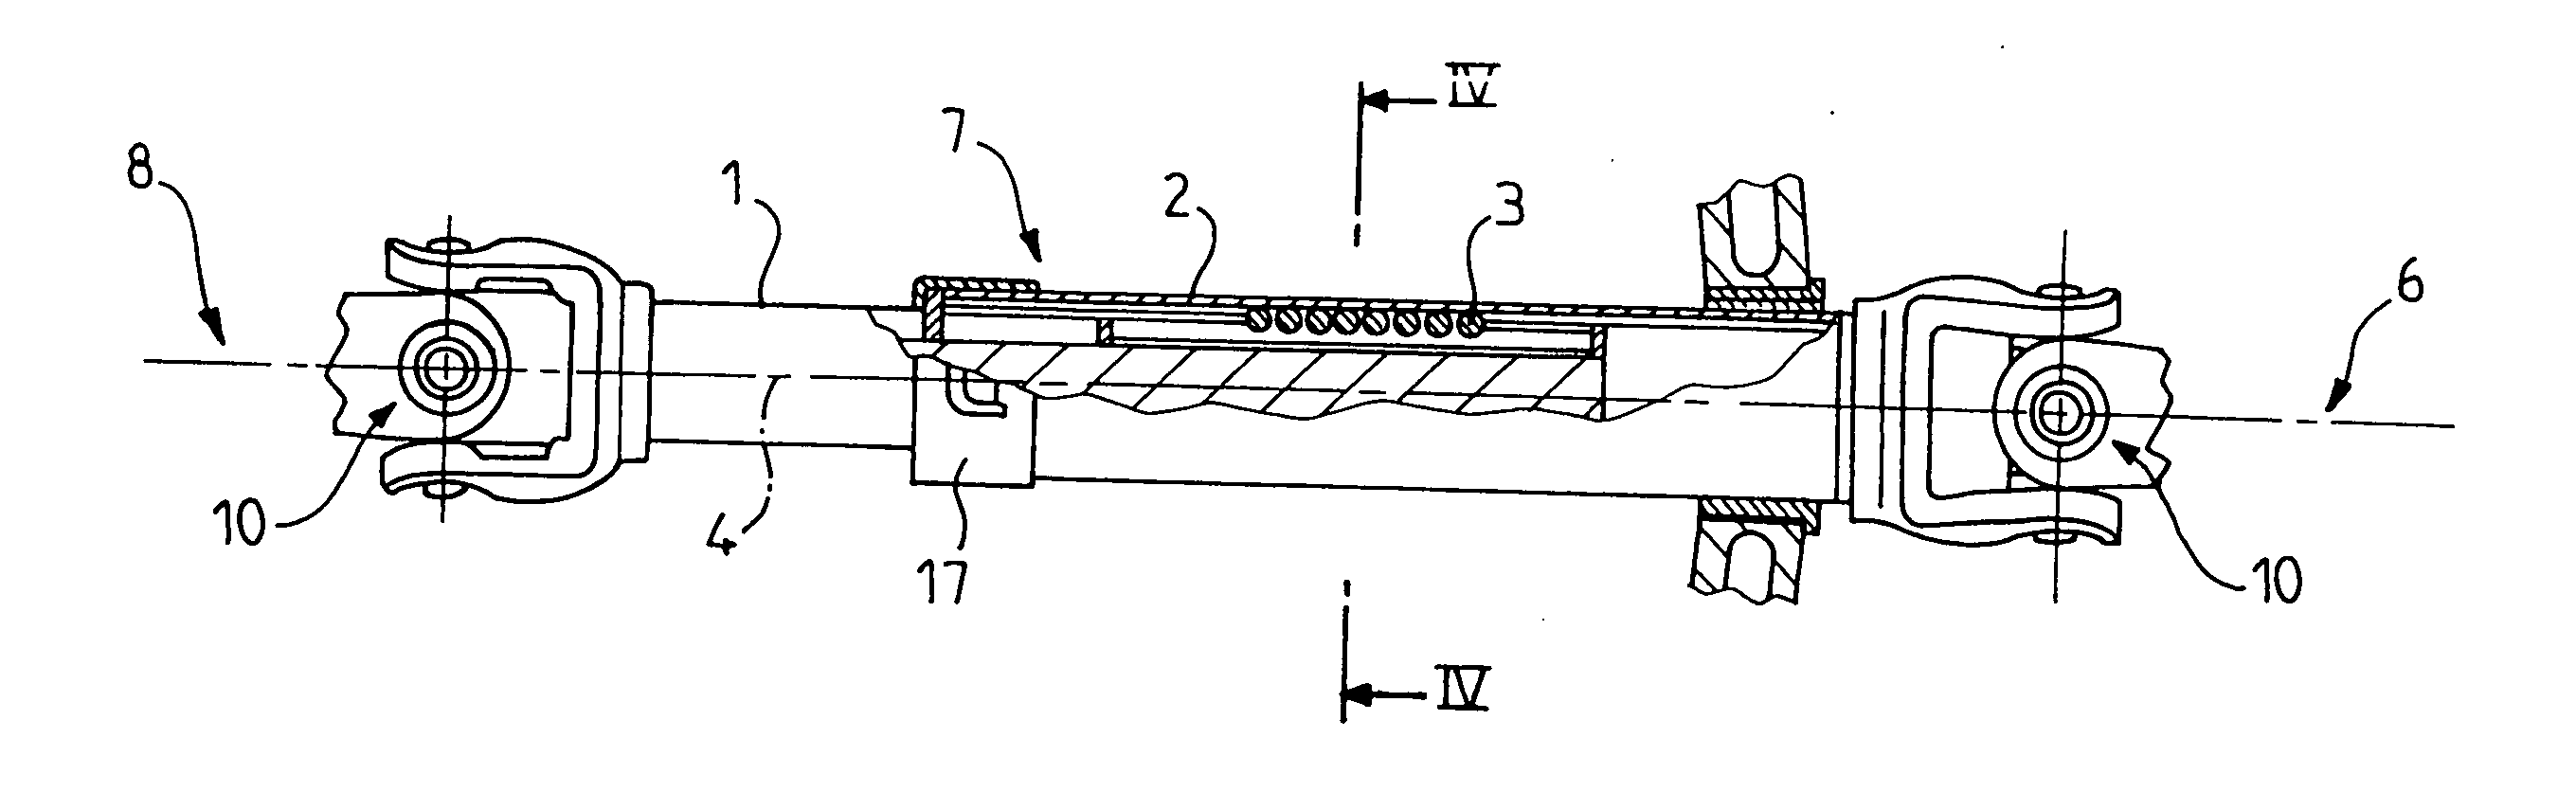 Ball coupling device for keeping two sliding shafts articulated